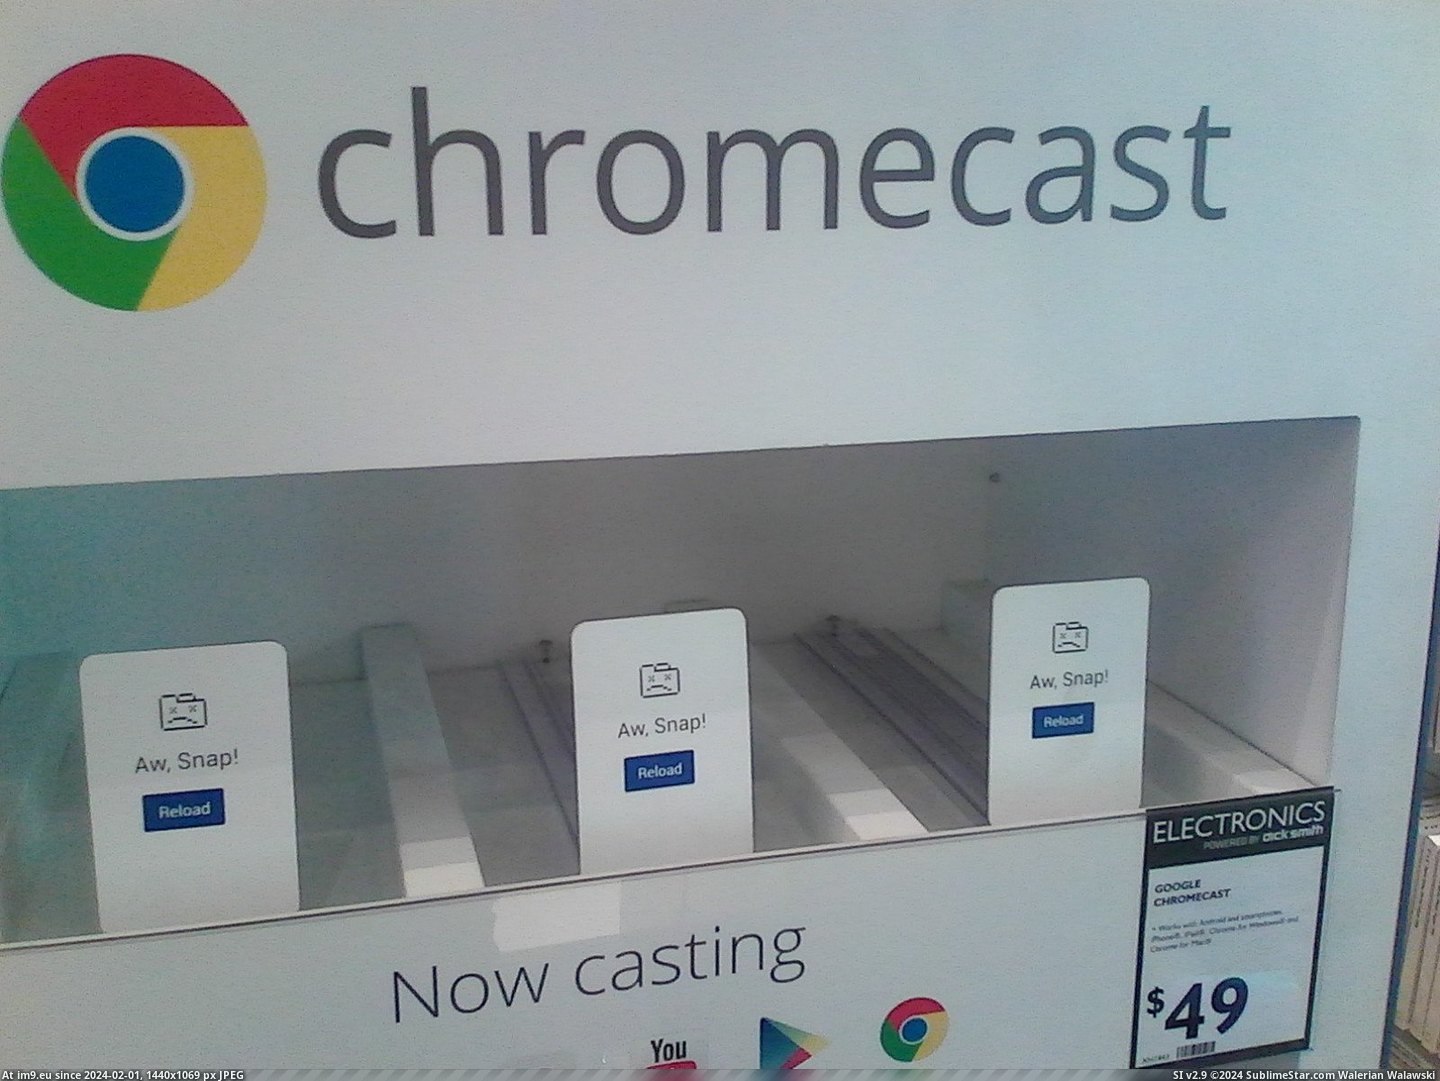 [Mildlyinteresting] The chromecast stand displays 'Aw, snap!' when out of stock (in My r/MILDLYINTERESTING favs)